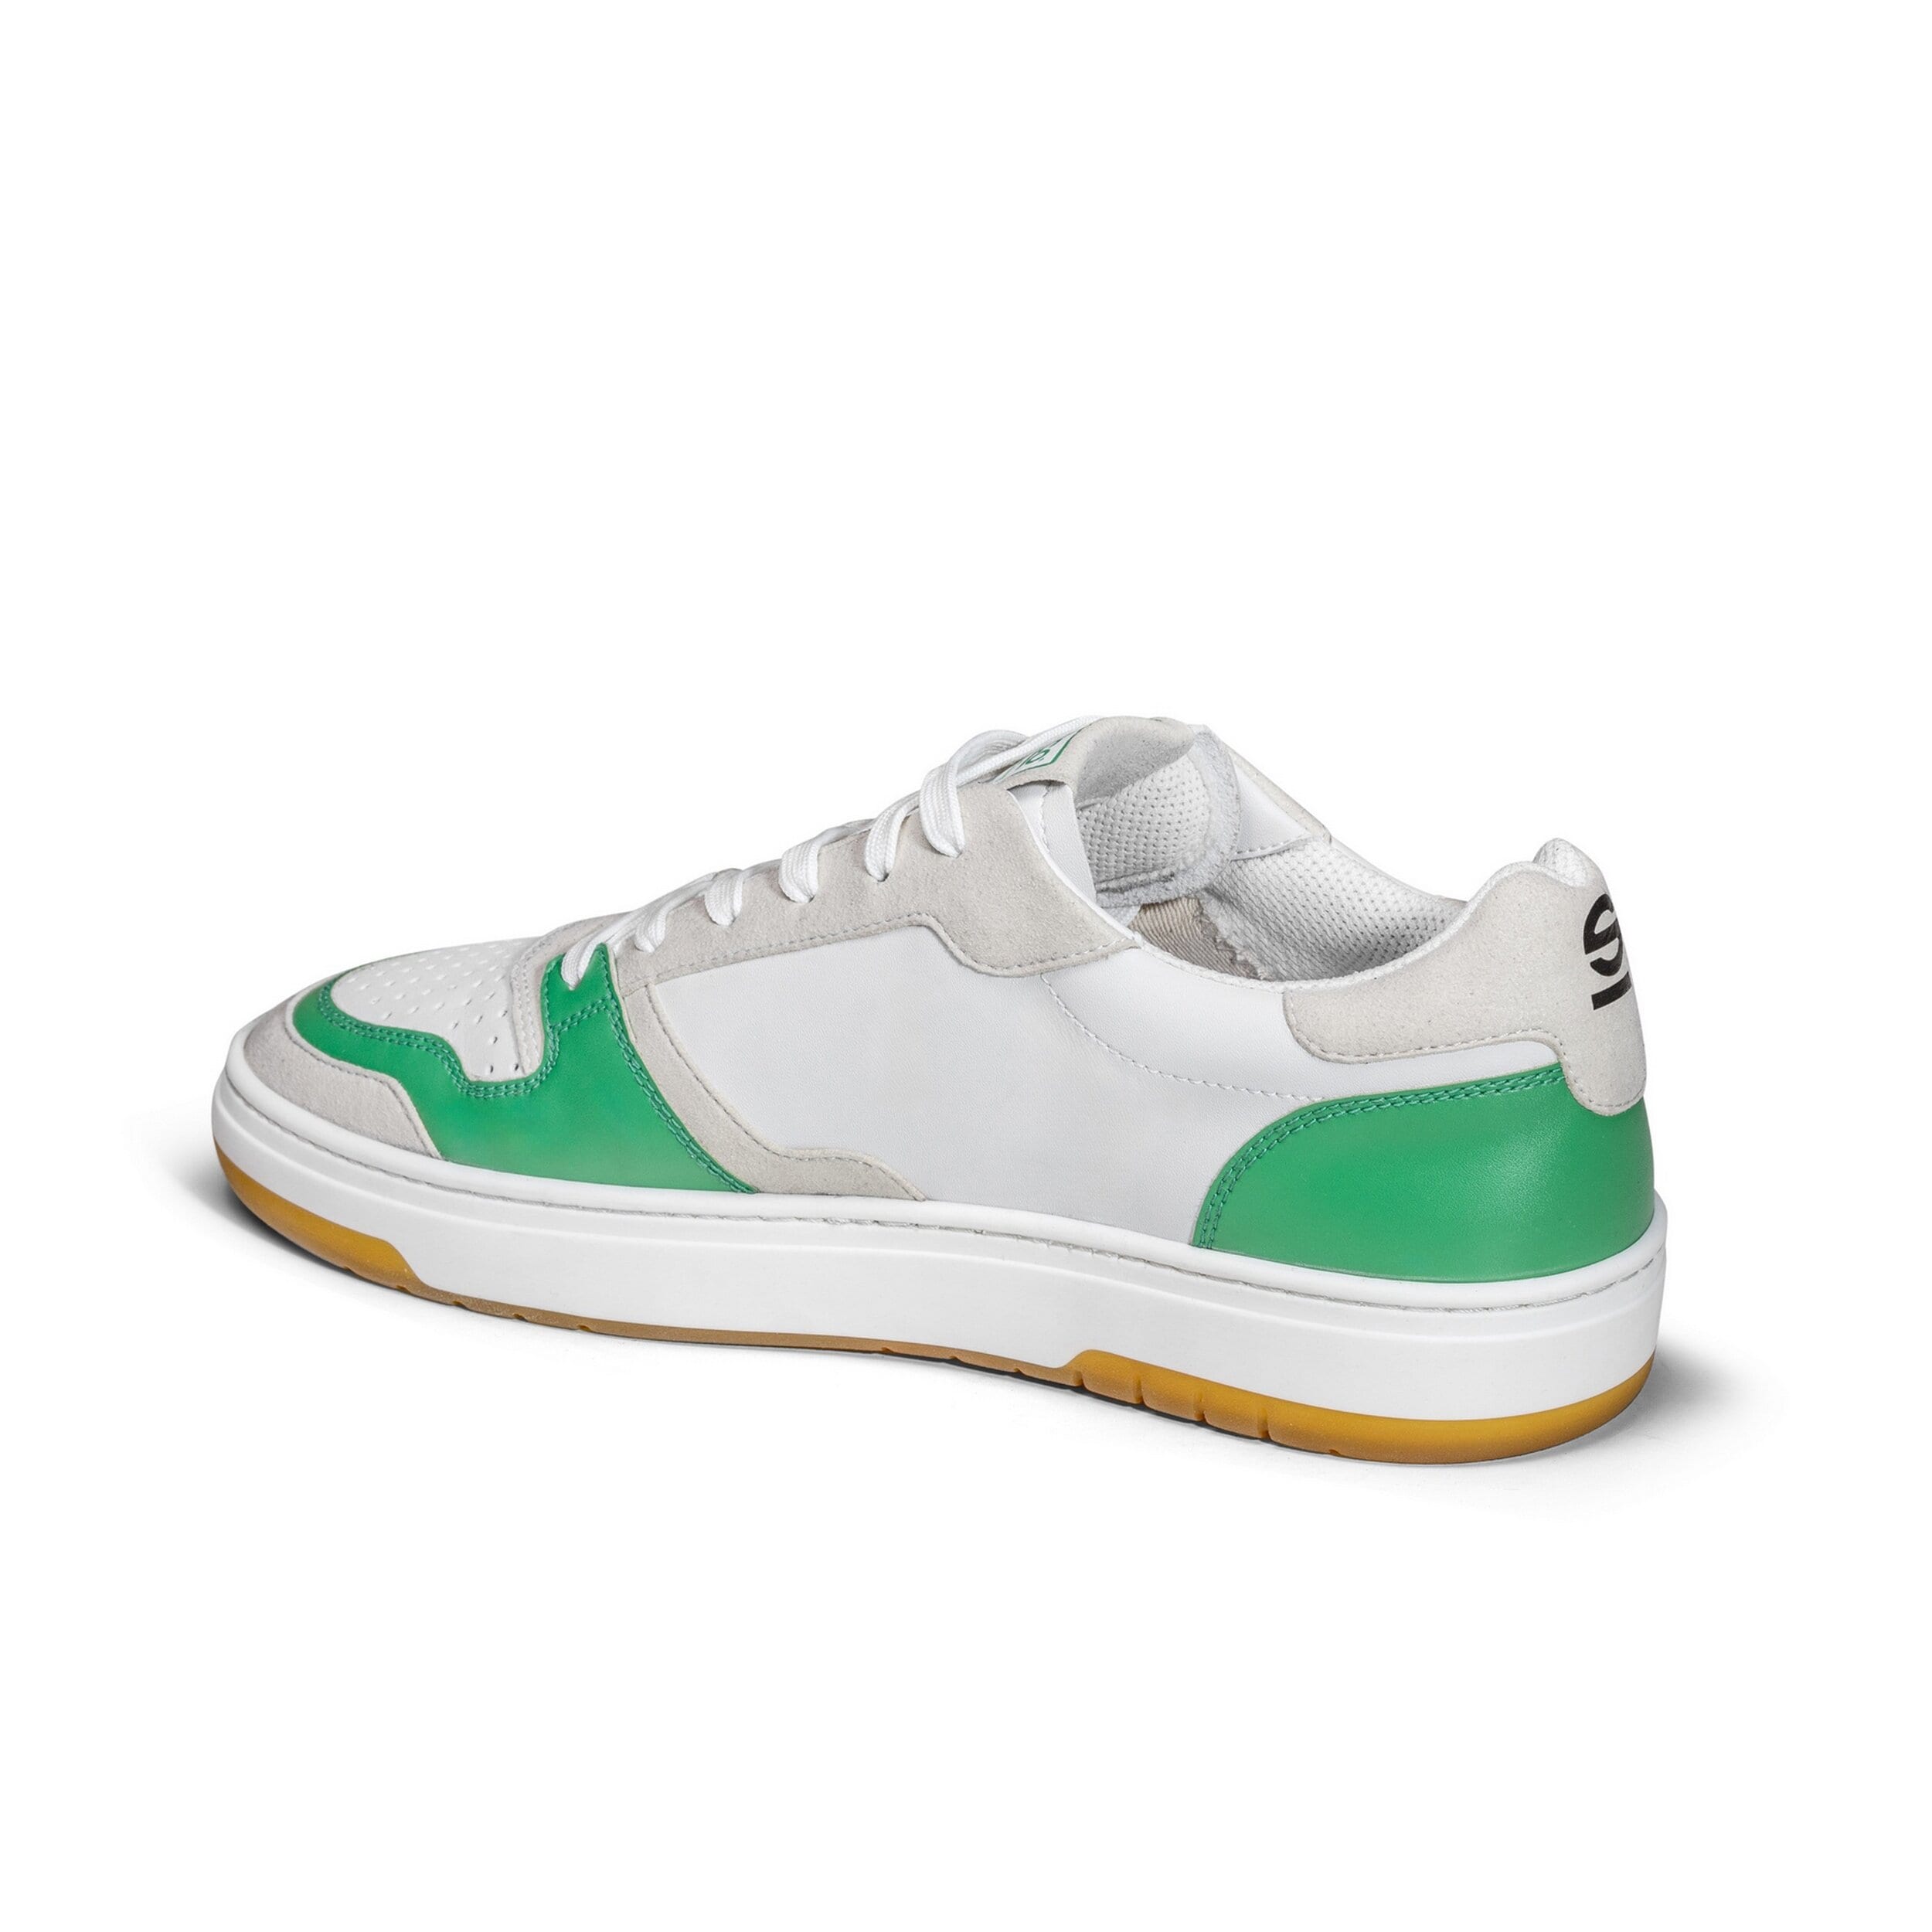 Shoes Sparco S-Urban White/Green